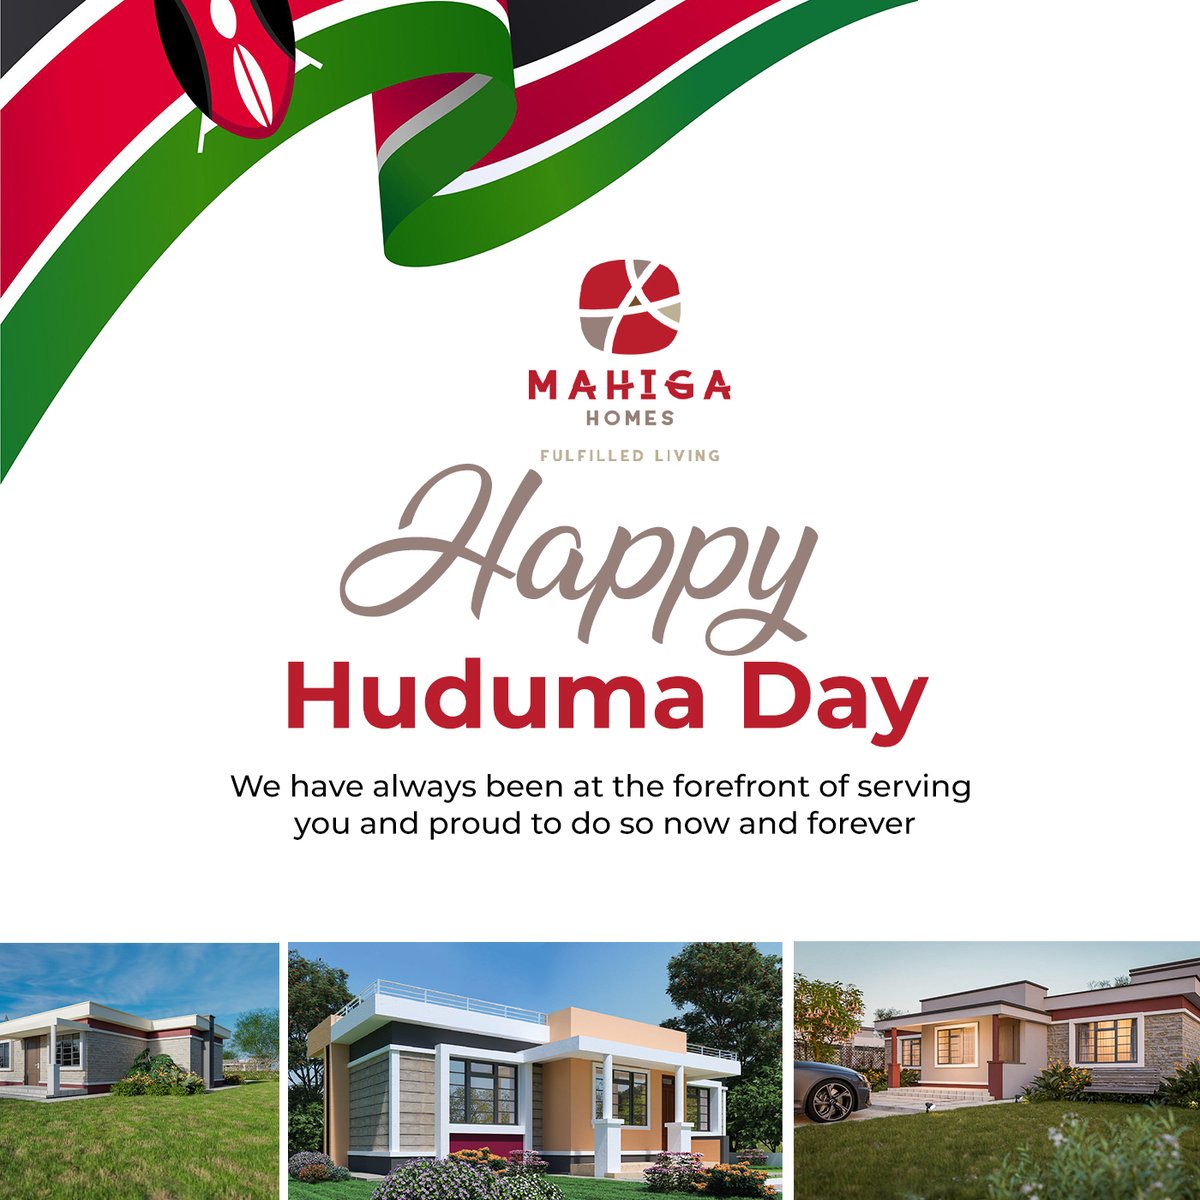 Happy Huduma Day to all. This day reminds us of the importance of working together and helping our nation walk up the ladder of success.

#creatingsmiles #mahigahomes